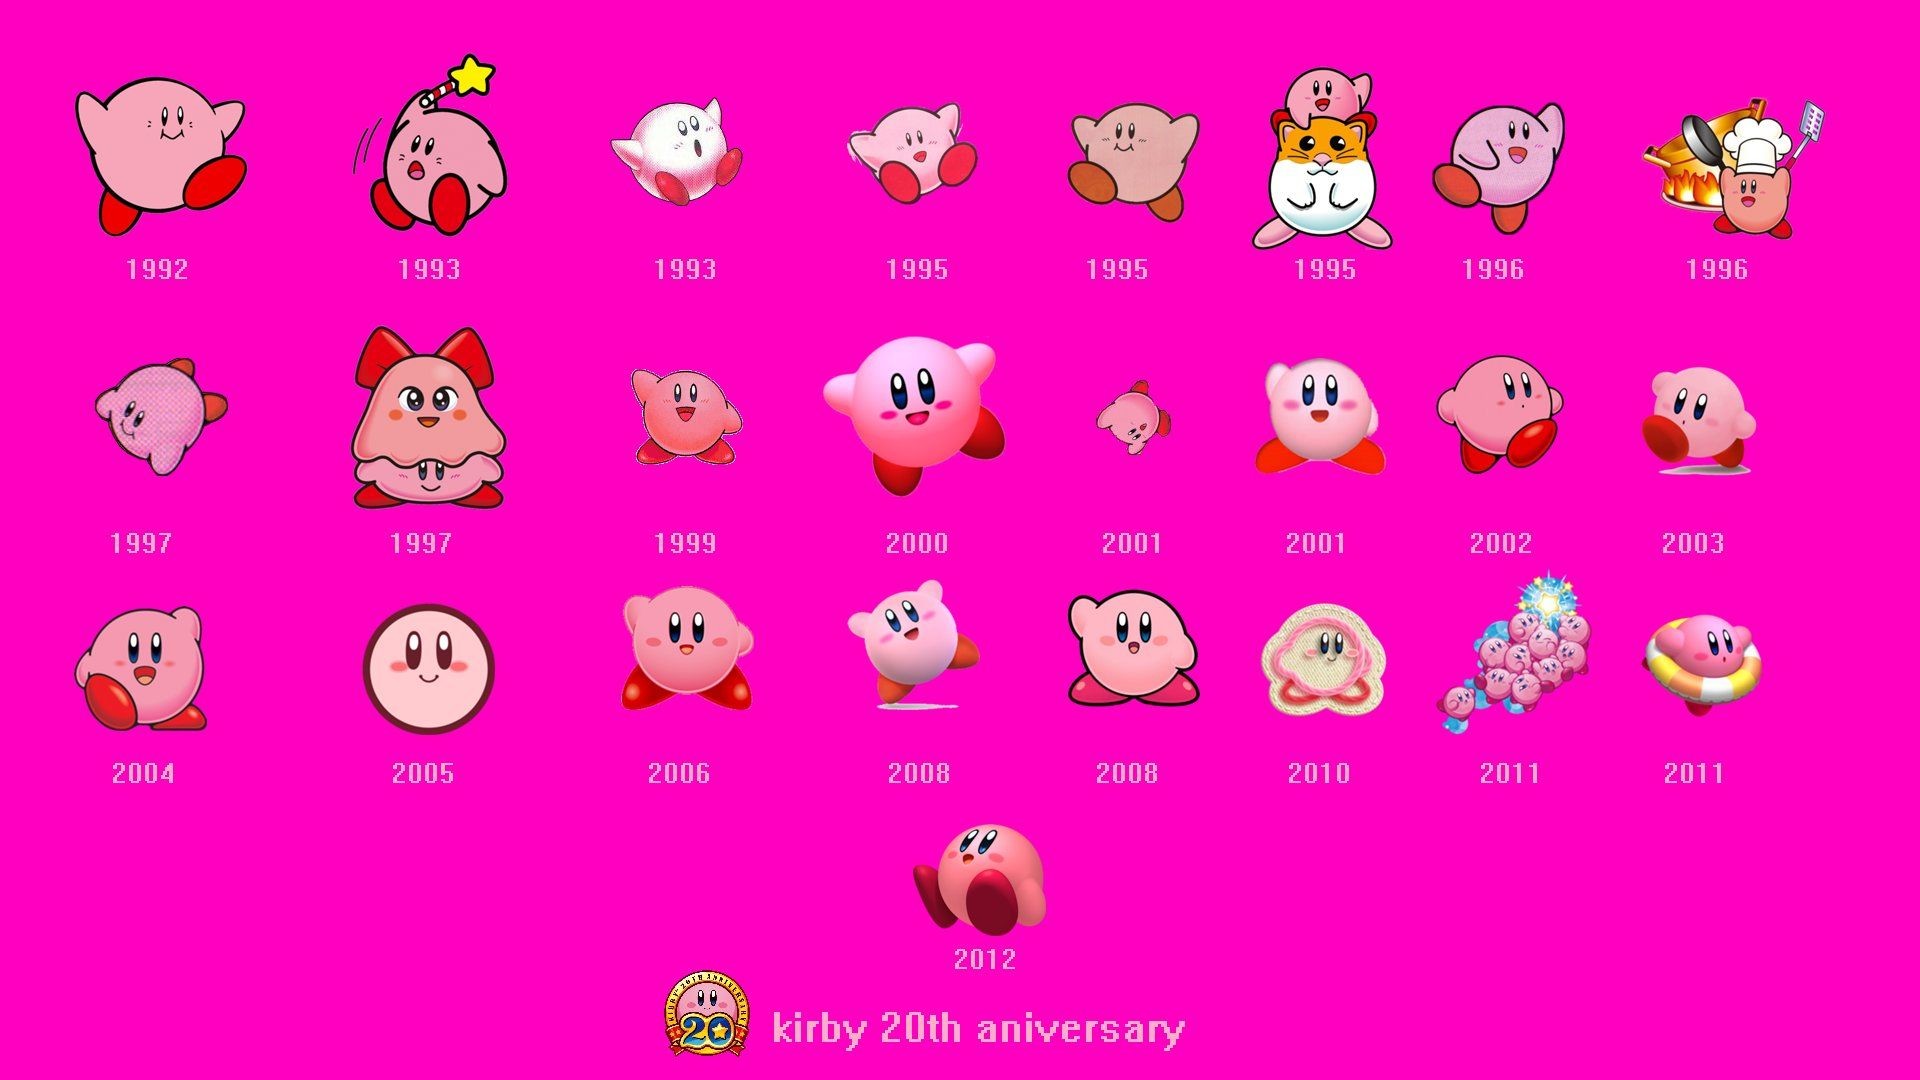 1920x1080 ... Hd Kirby Wallpapers. Download